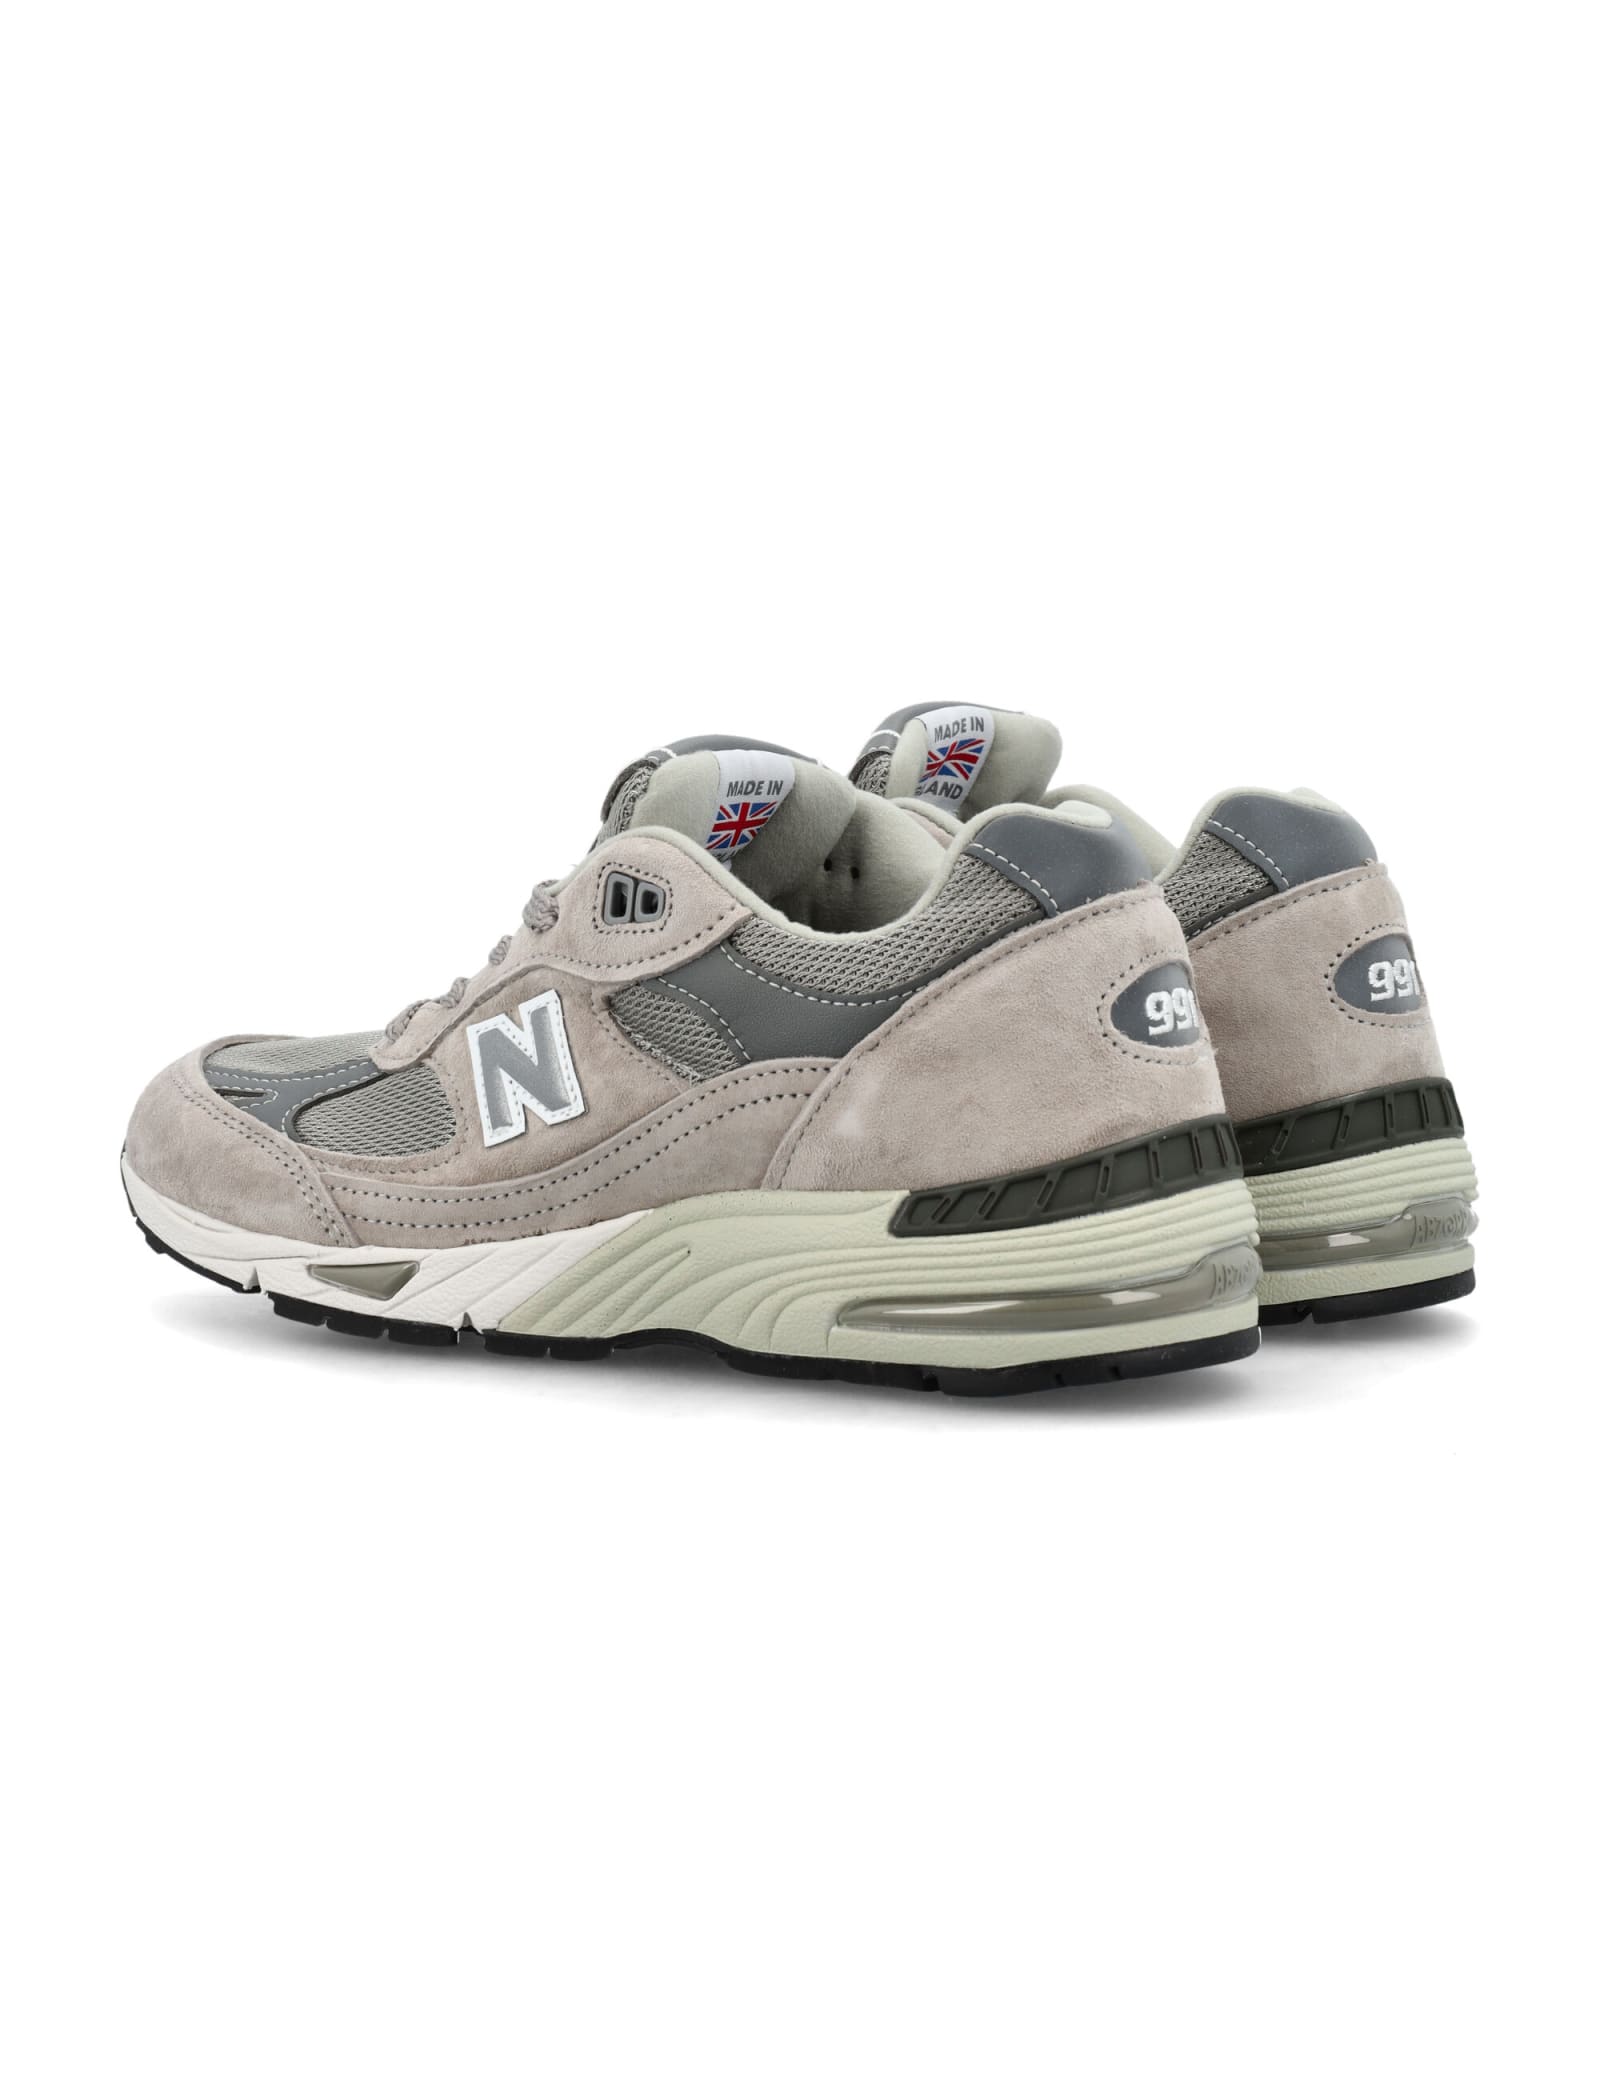 New Balance 991v1 Made In Uk Trainers W991gl In Grey | ModeSens